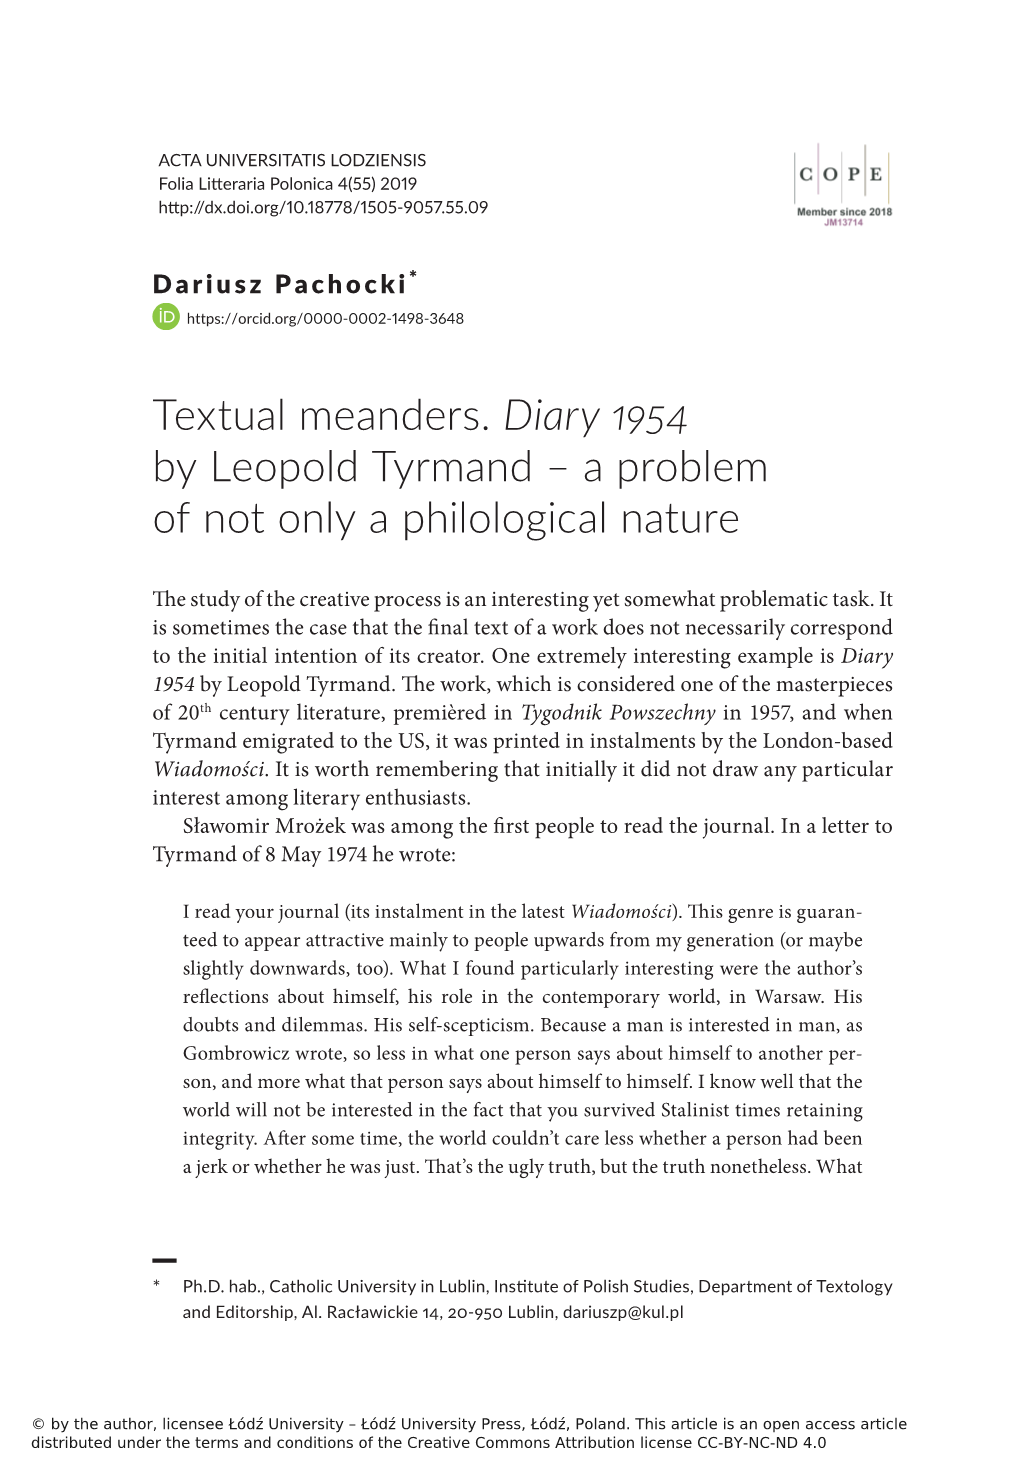 Textual Meanders. Diary 1954 by Leopold Tyrmand – a Problem of Not Only a Philological Nature